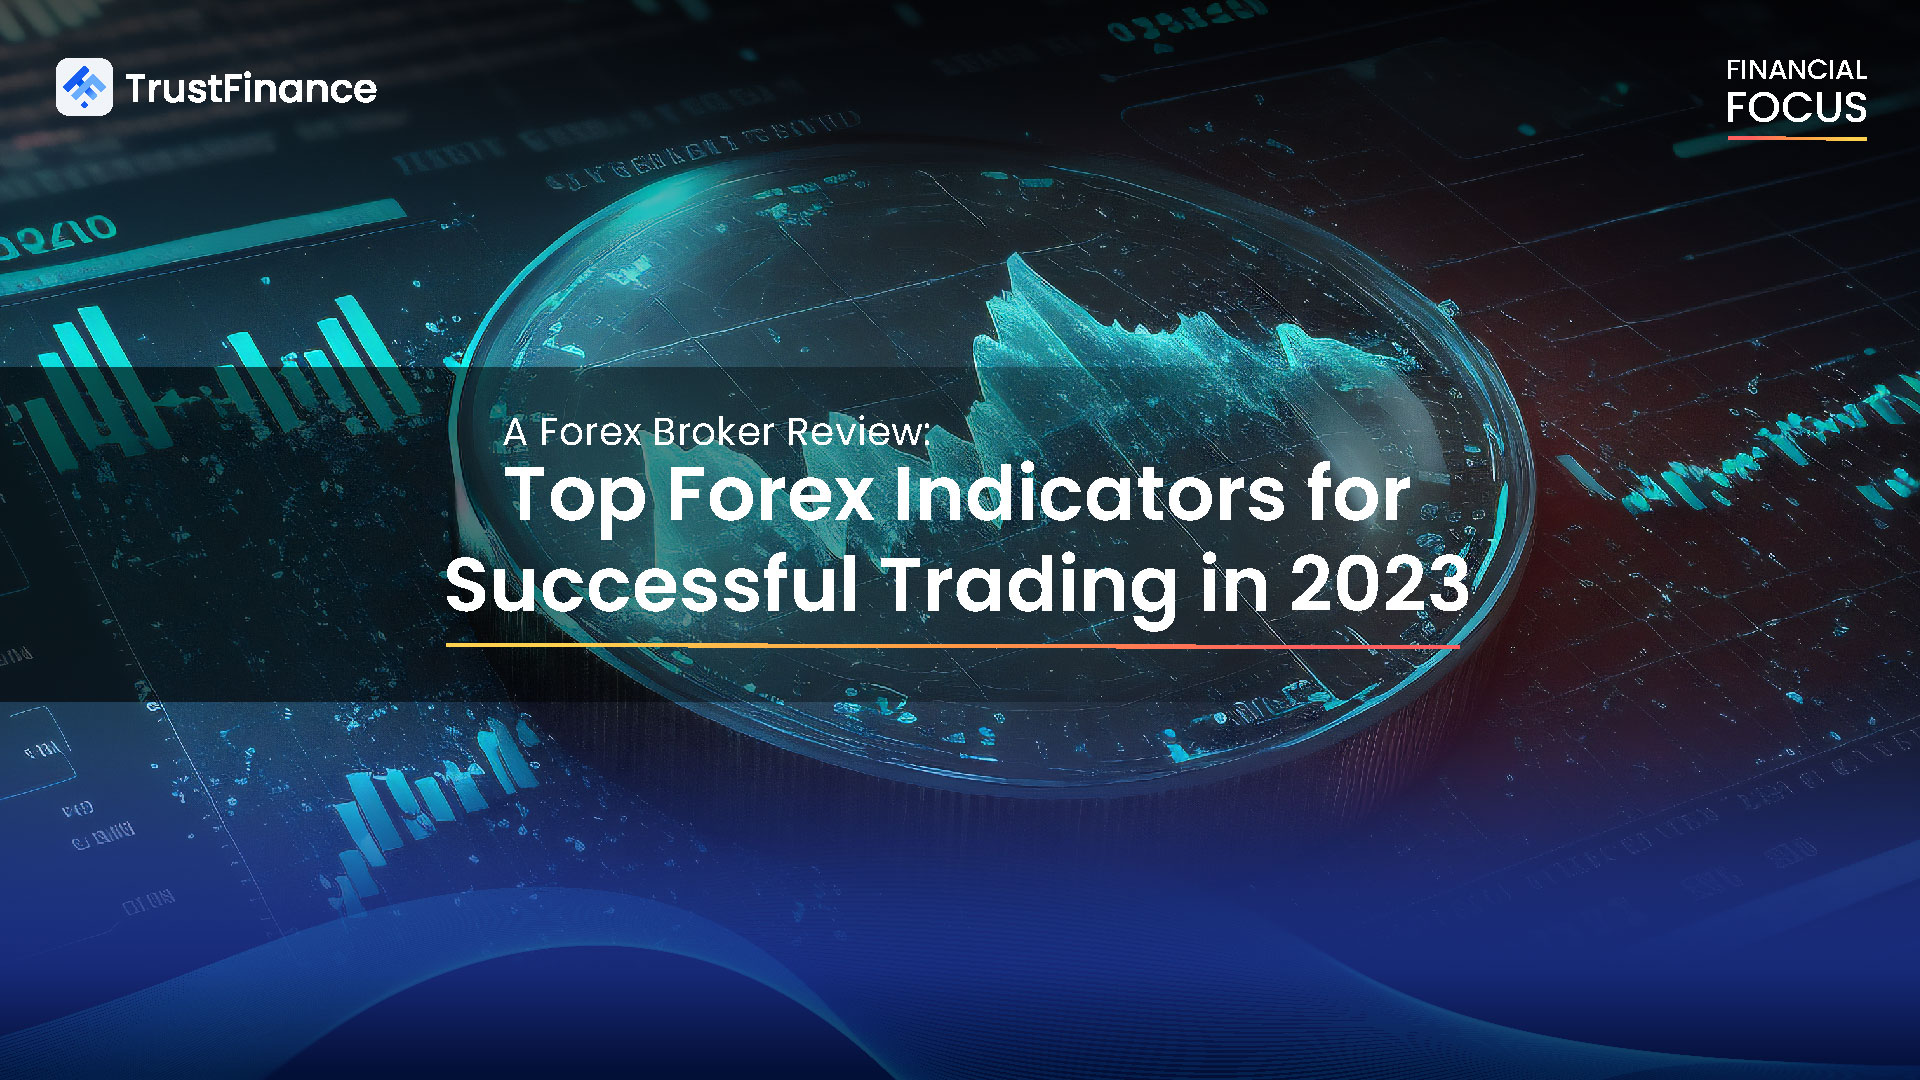 Top Forex Indicators for Successful Trading in 2023: A Forex Broker Review